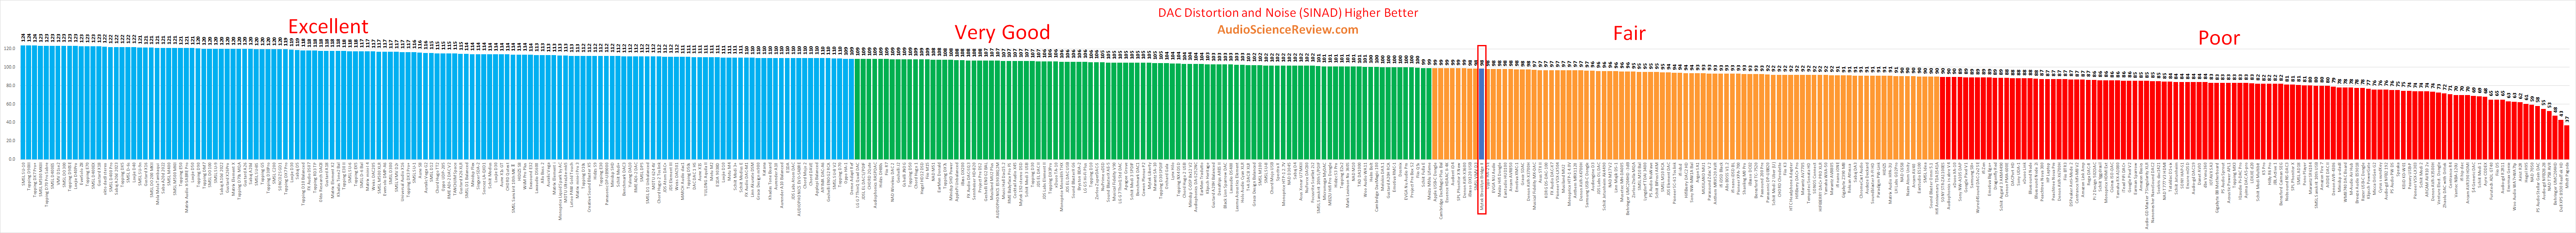 best roon core balanced dac review.png